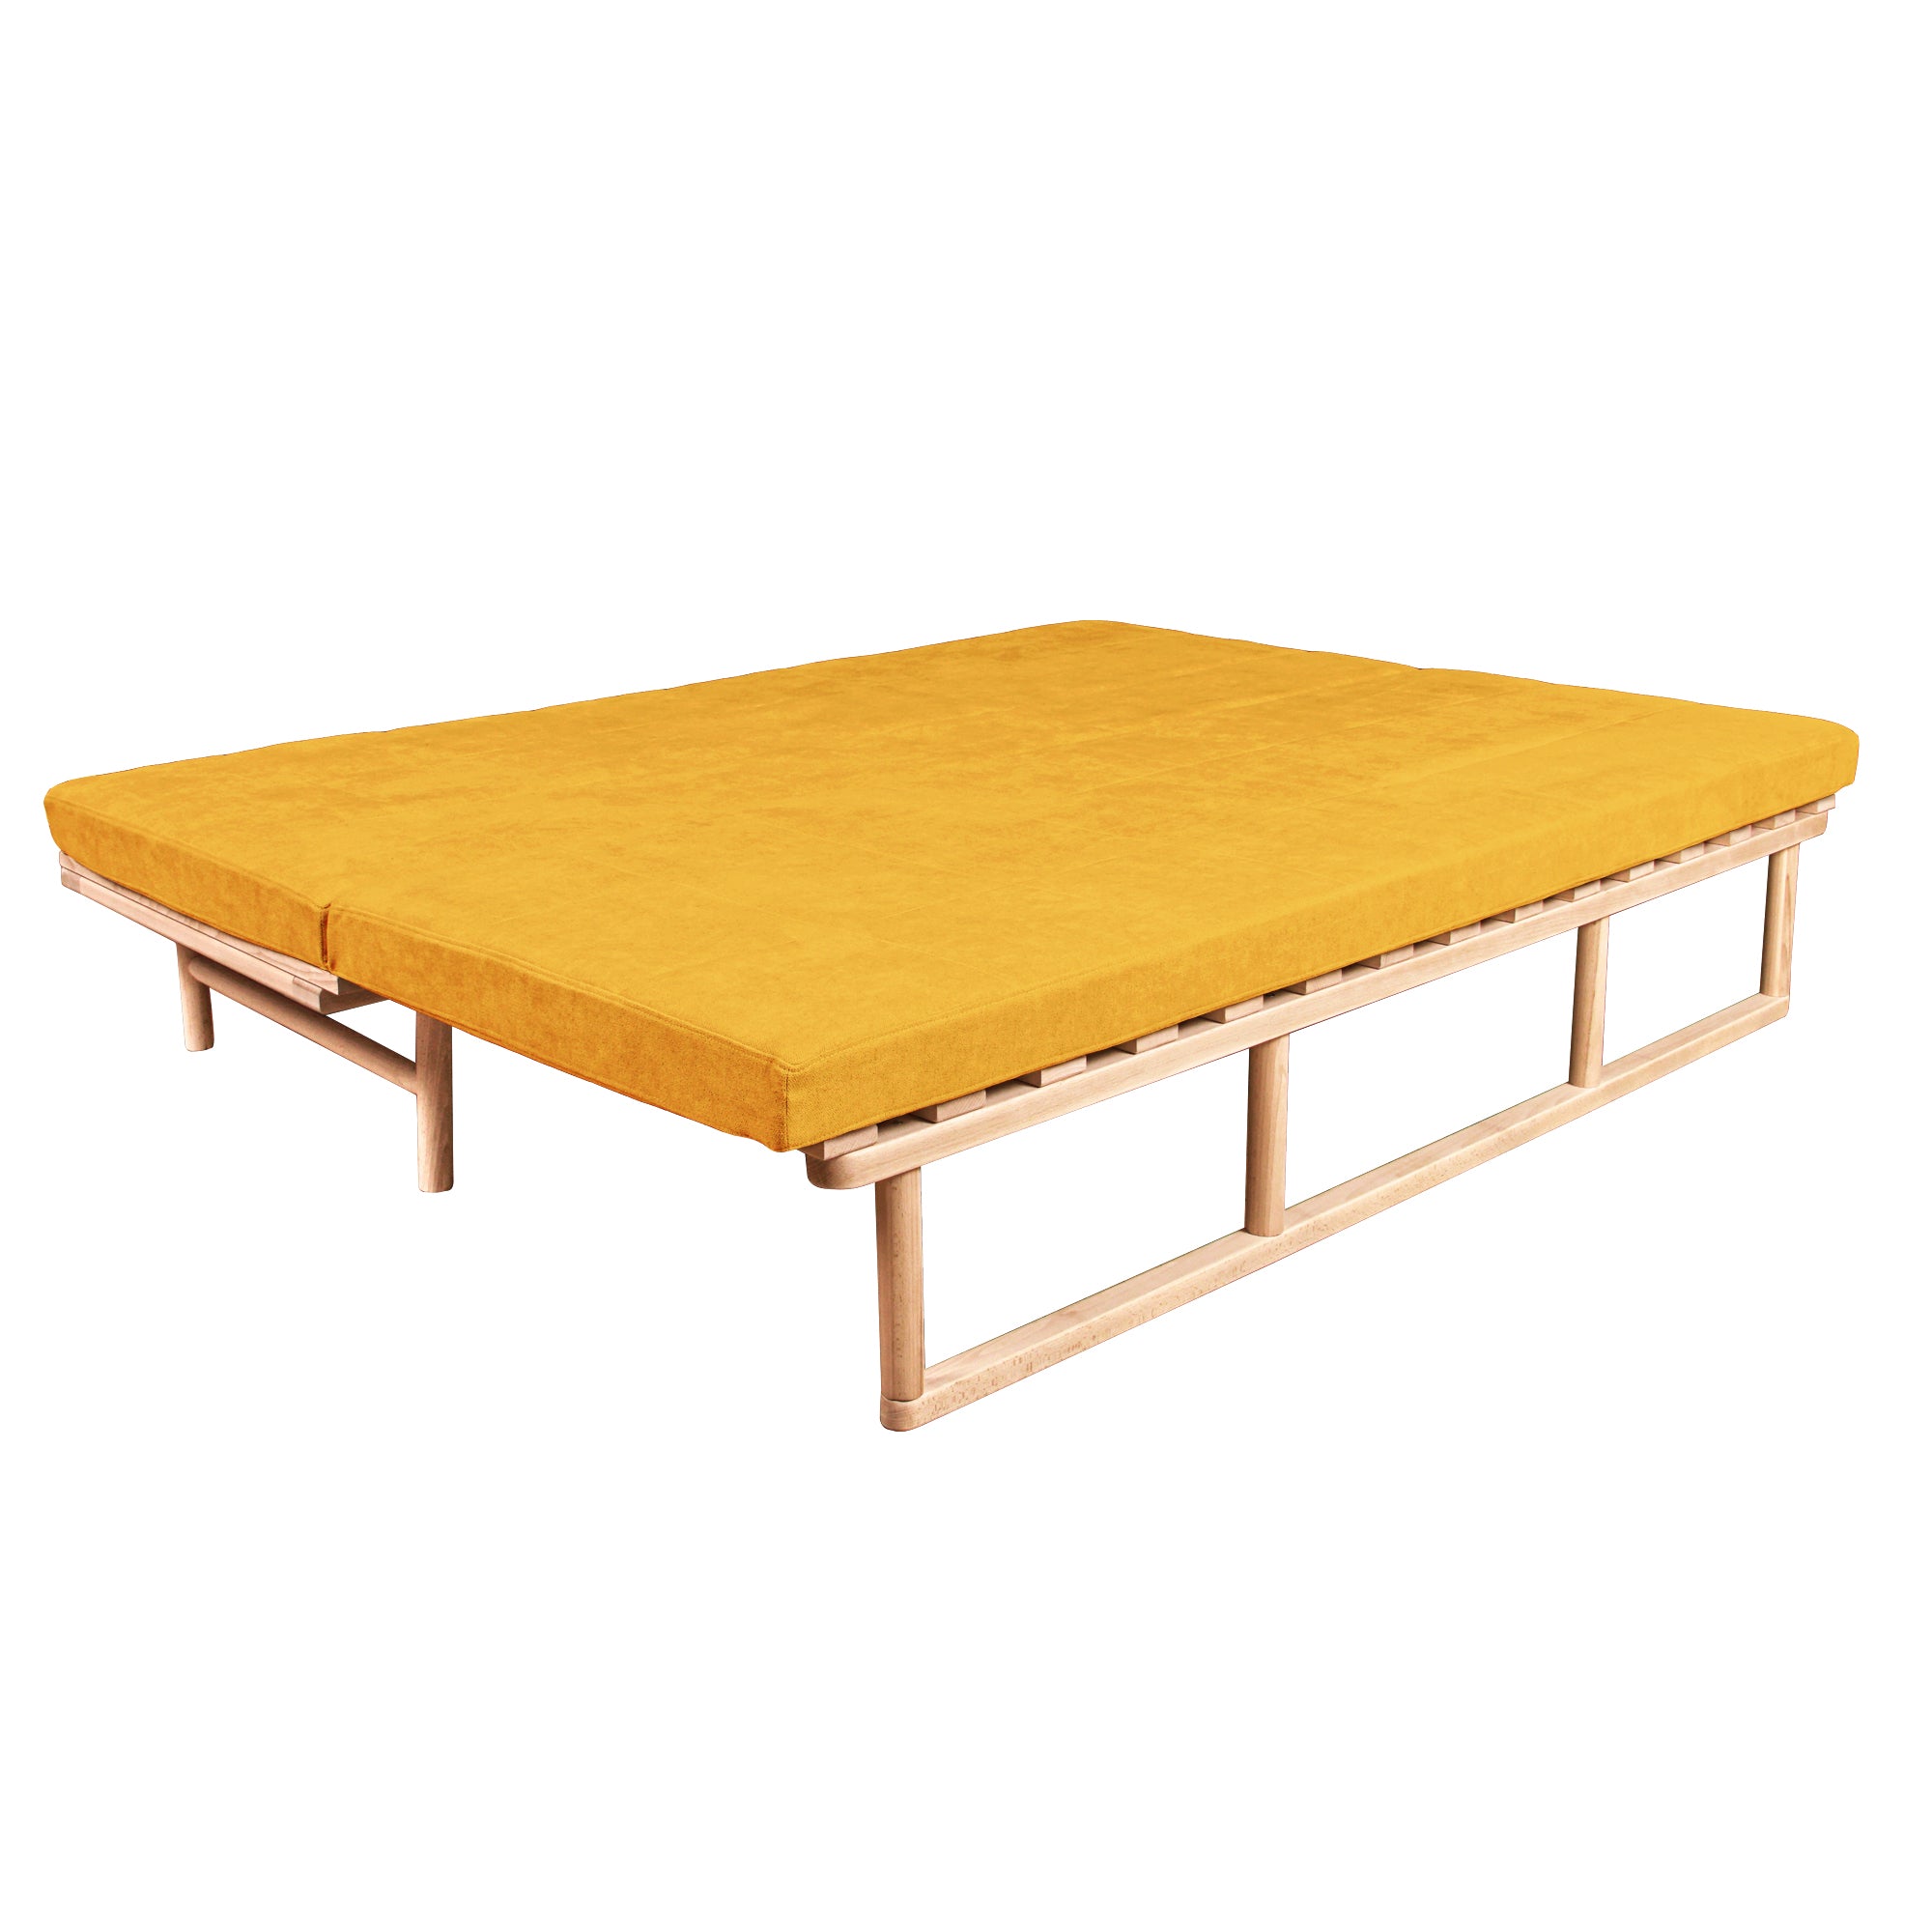 Le MAR Folding Daybed, Beech Wood Frame, Natural Colour-upholstery yellow-folded view